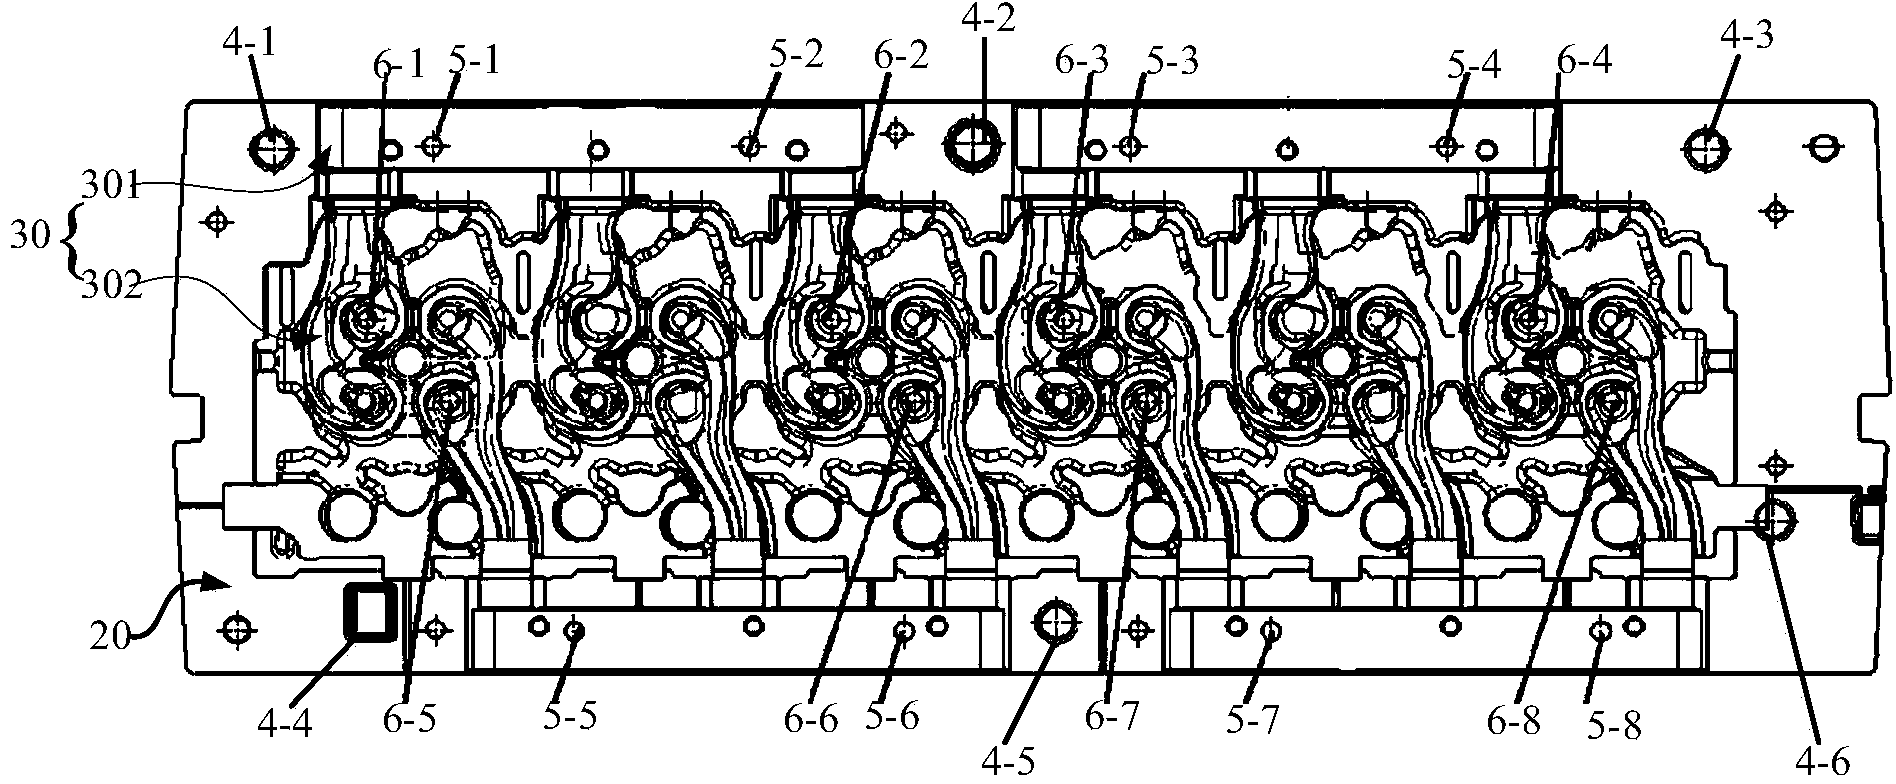 Cylinder head sand core group and assembling method